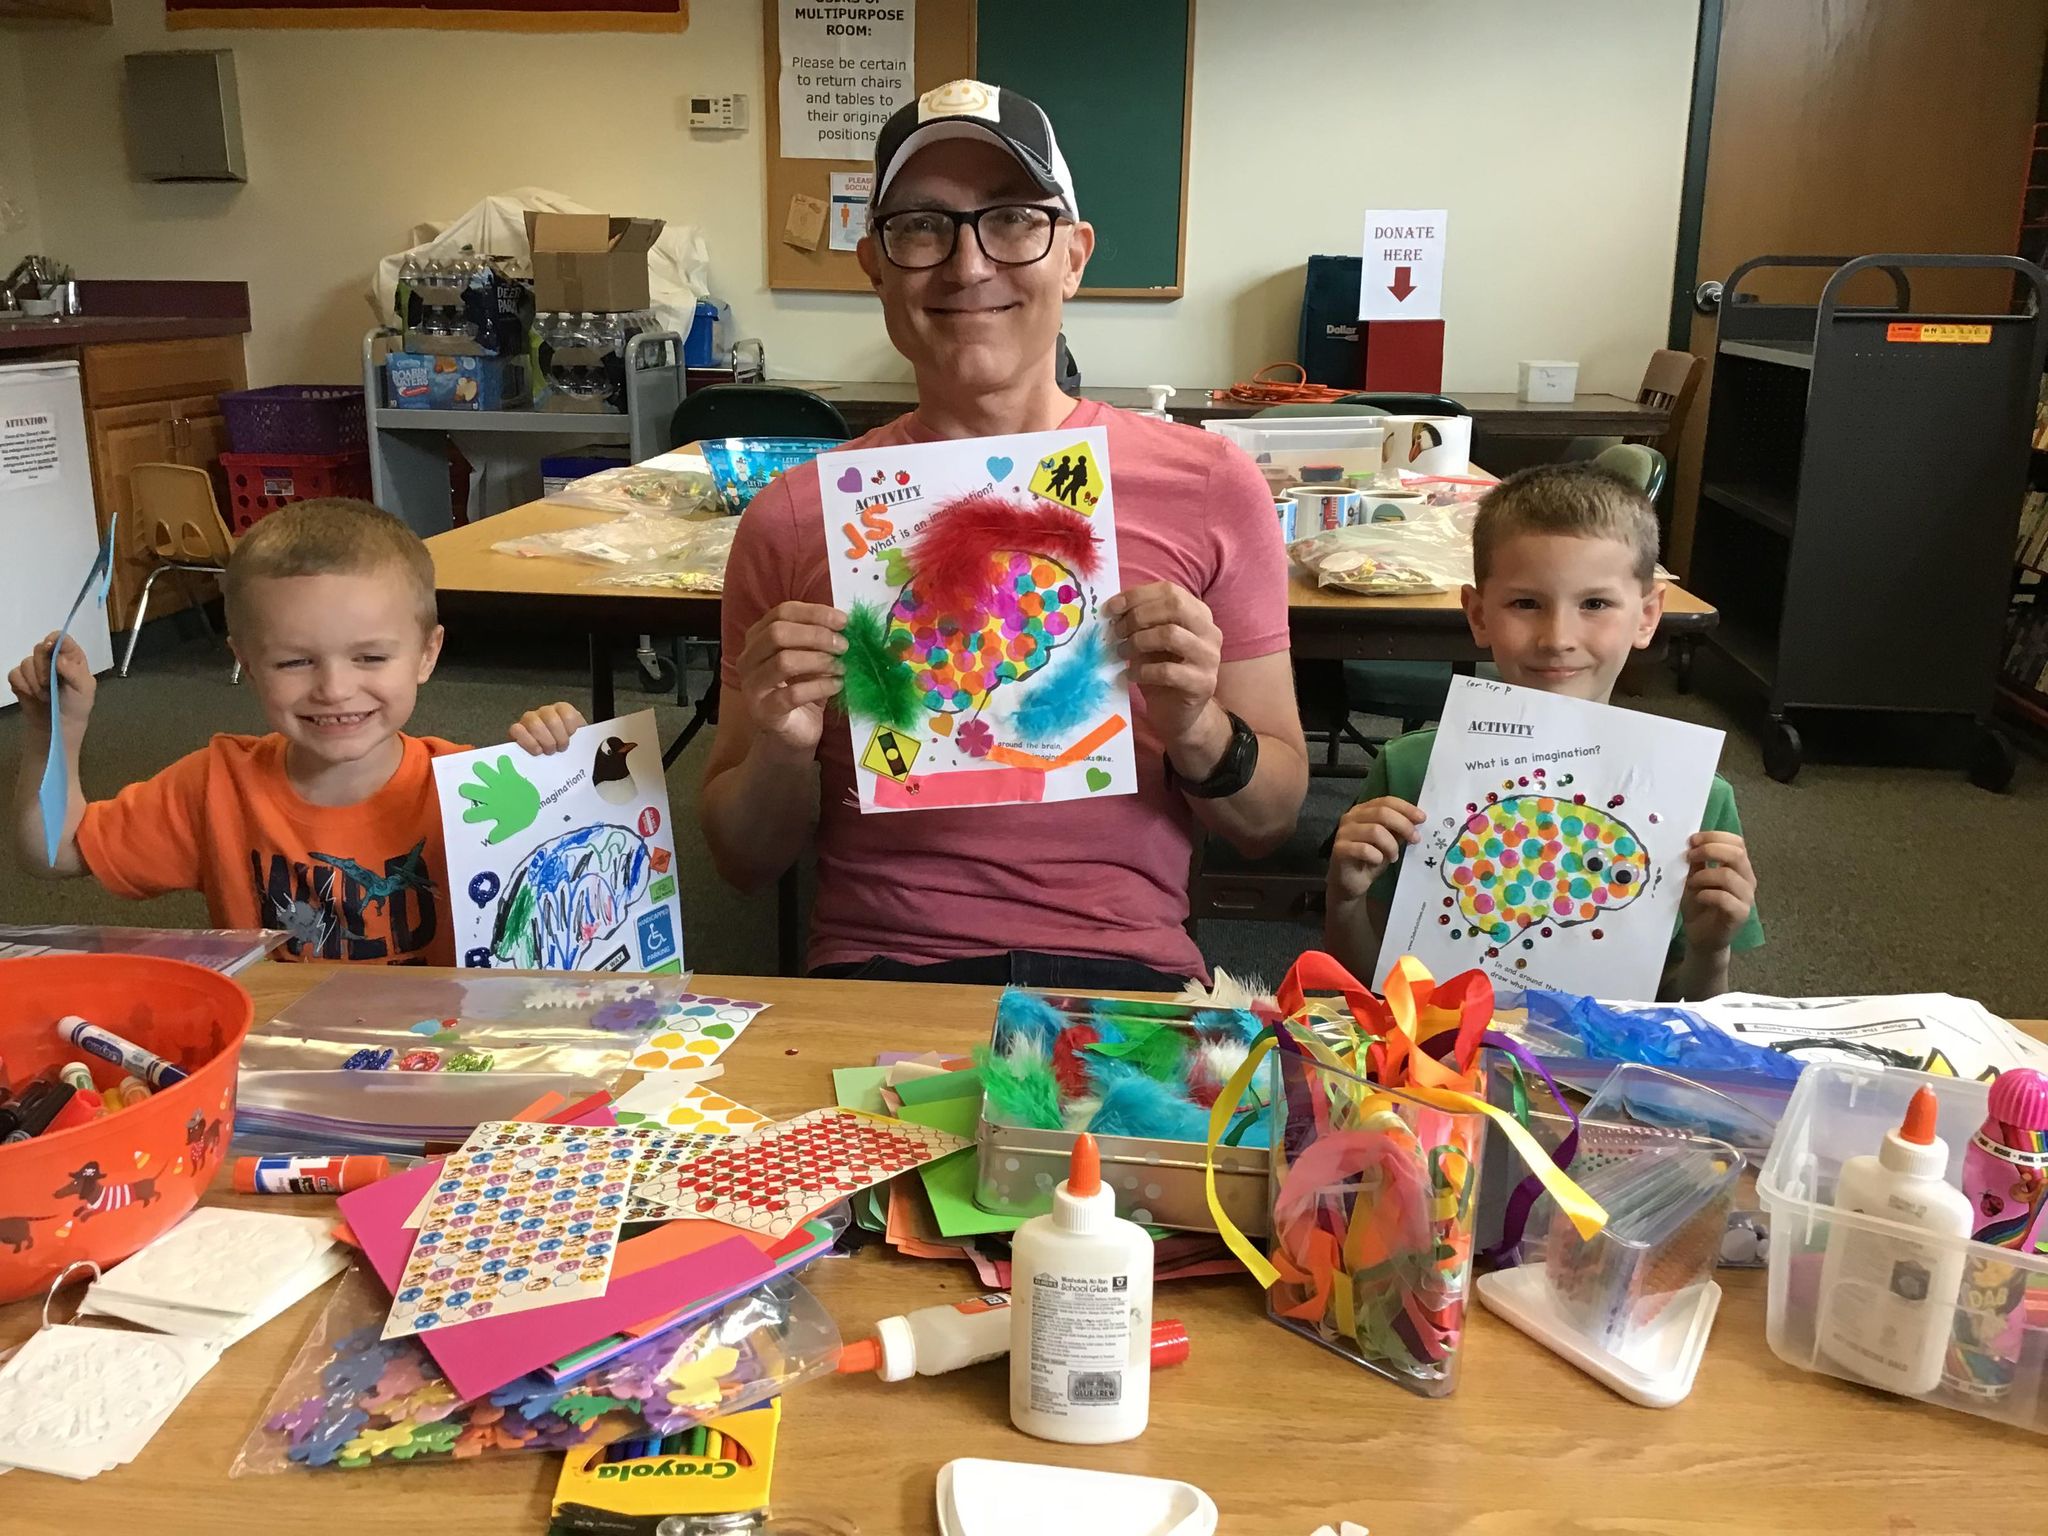 Pictured are John Schlimm with two program attendees showing off their imagination crafts.